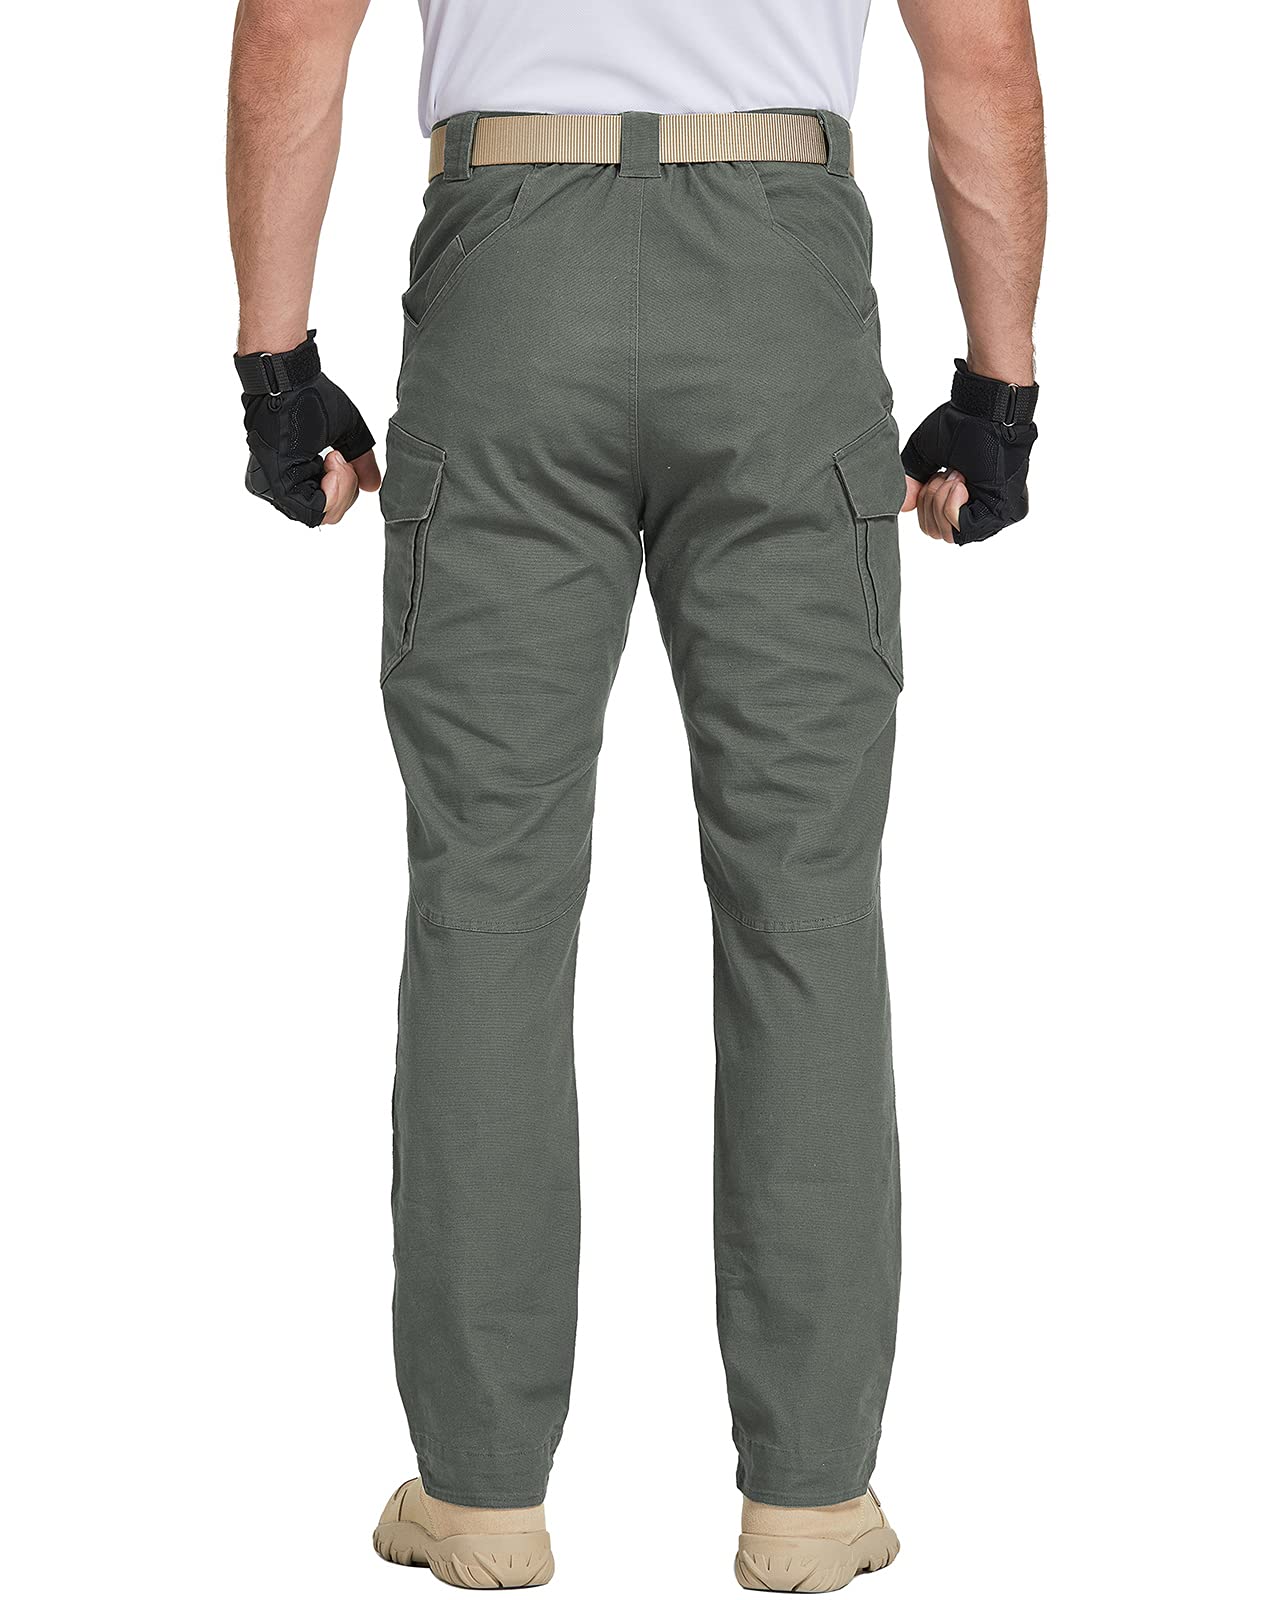 FEDTOSING Tactical Pants for Men with 9 Pockets Cotton Cargo Work Military Trousers Stretch Hiking Combat Rip-Stop Pants Green 42x30